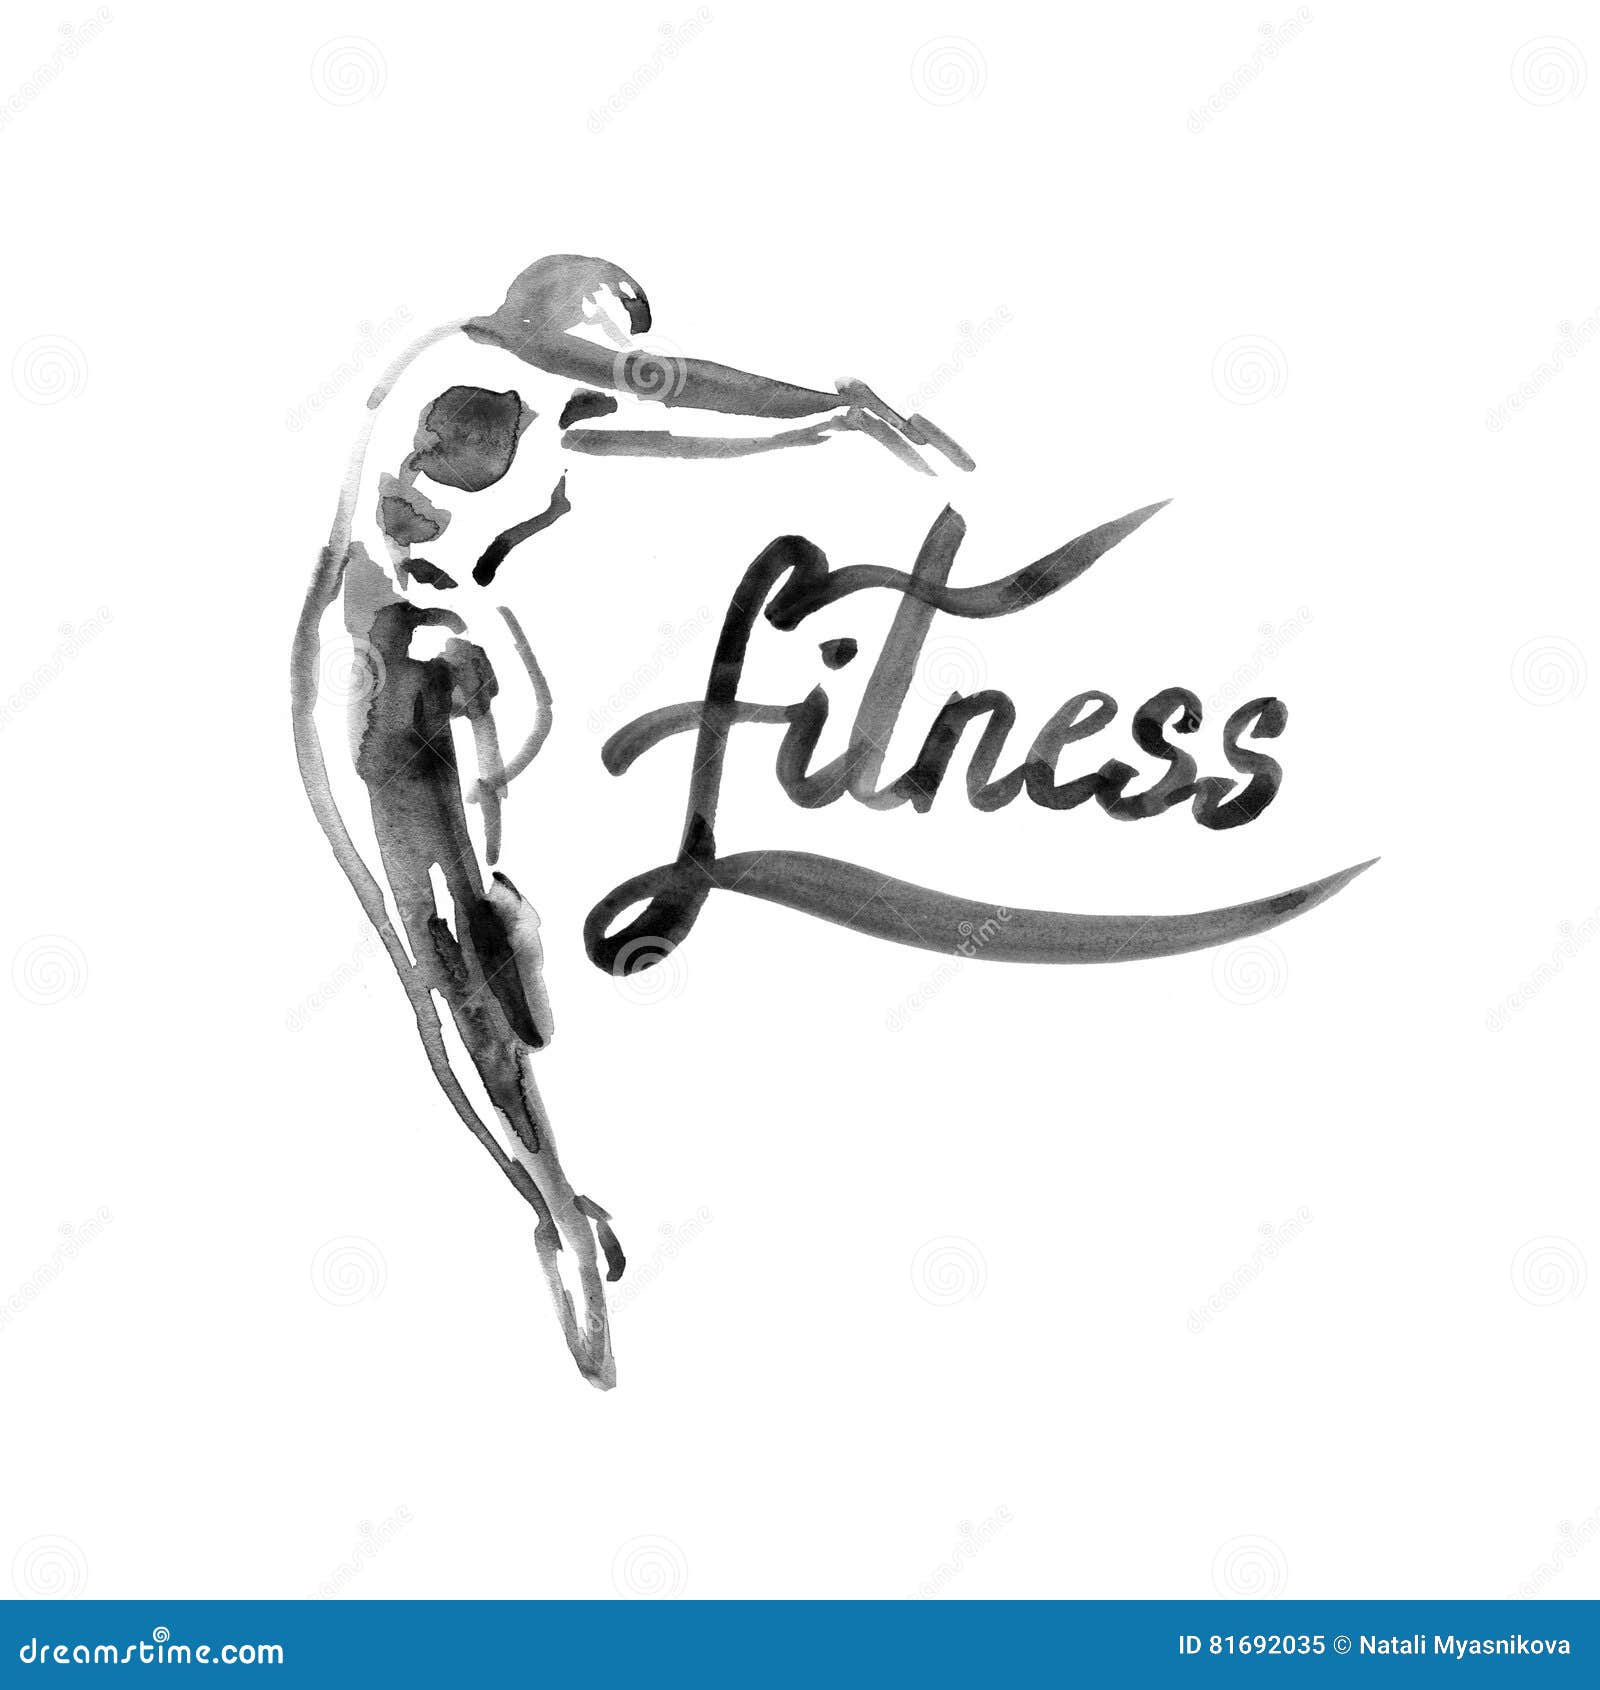 15,848 Watercolor Fitness Images, Stock Photos, 3D objects, & Vectors